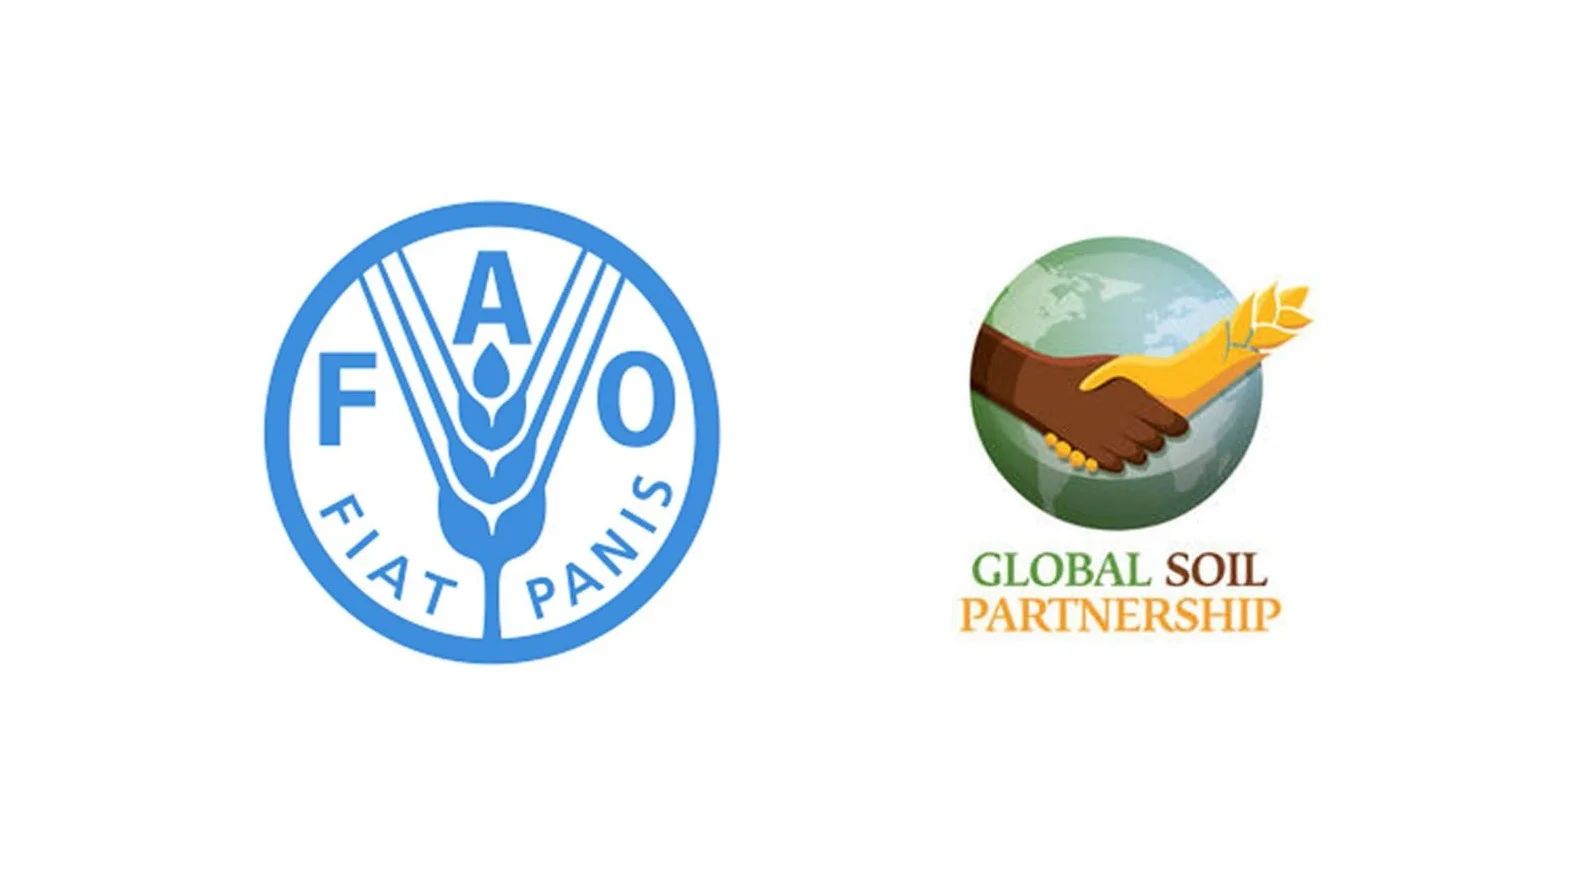 Global soil governance: Status and future perspectives